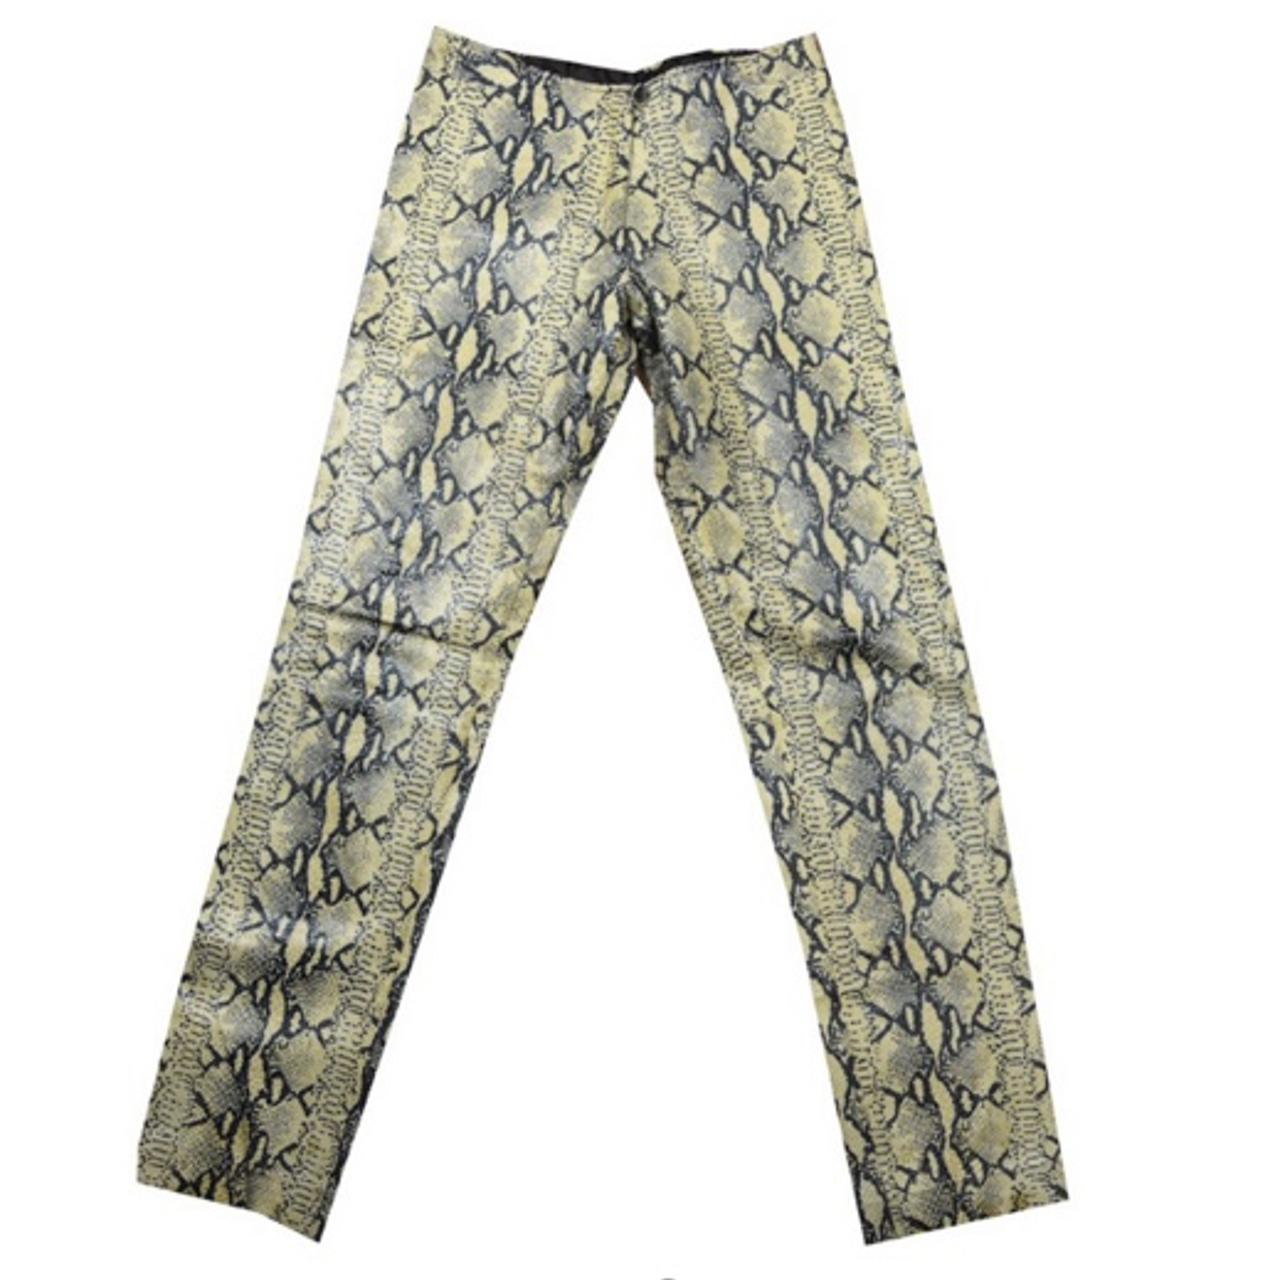 Vintage 90s real leather snake skin trousers, mid... - Depop